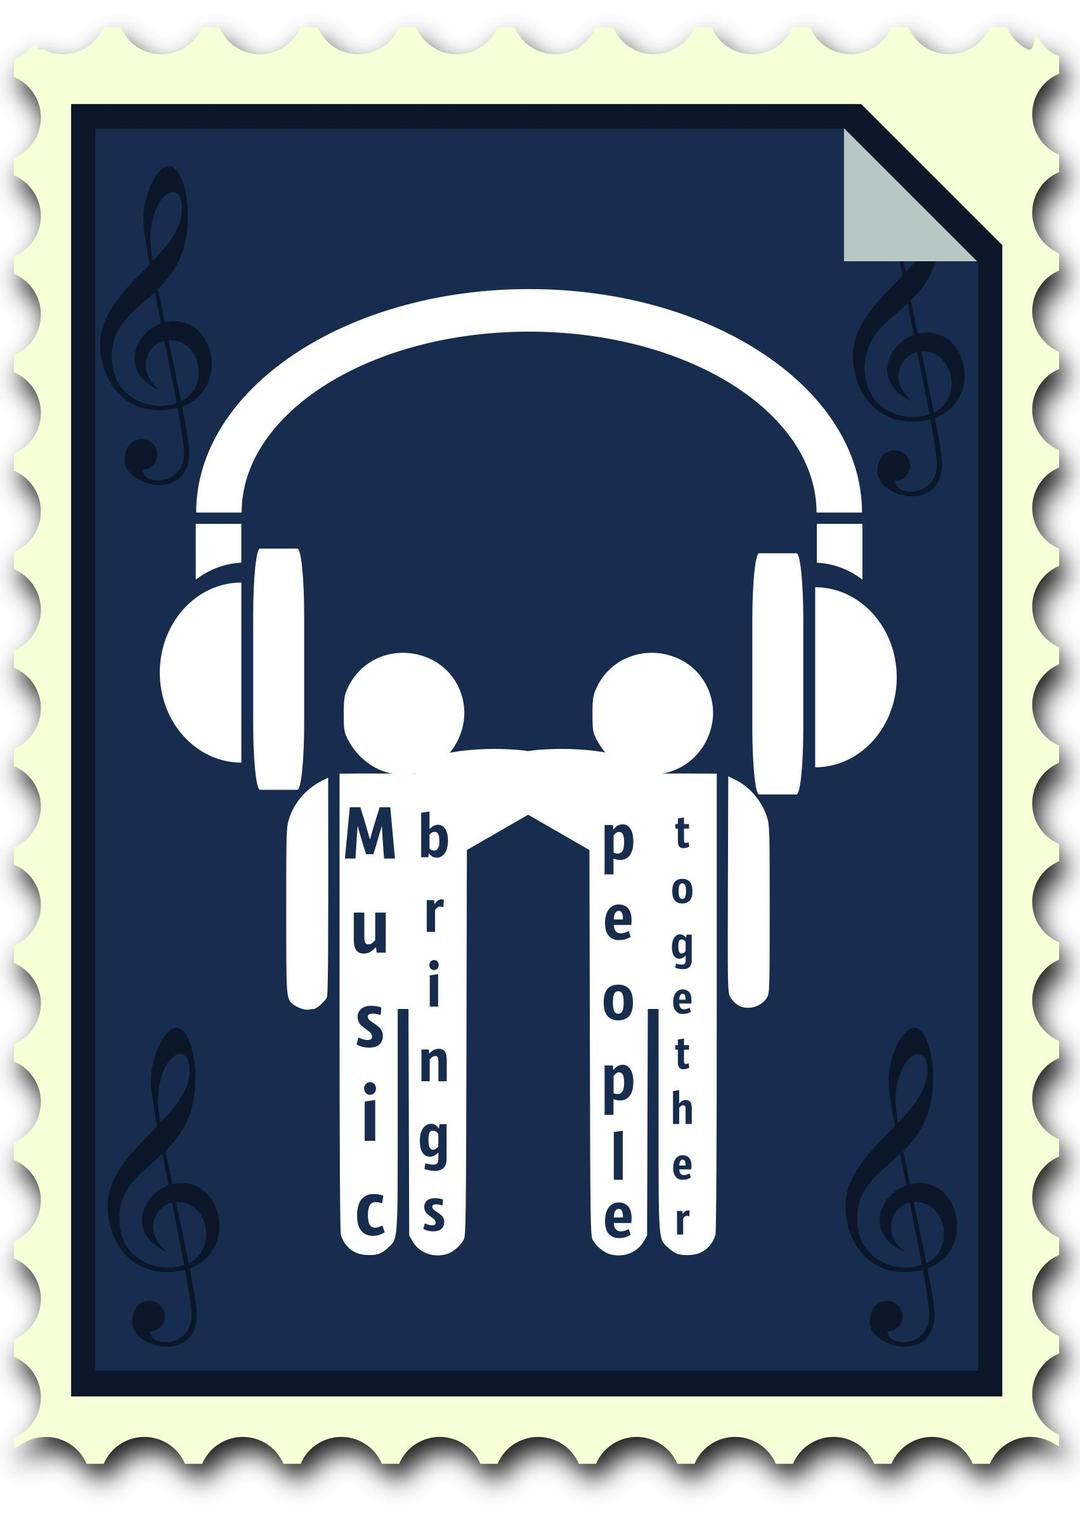 Music brings people together png transparent